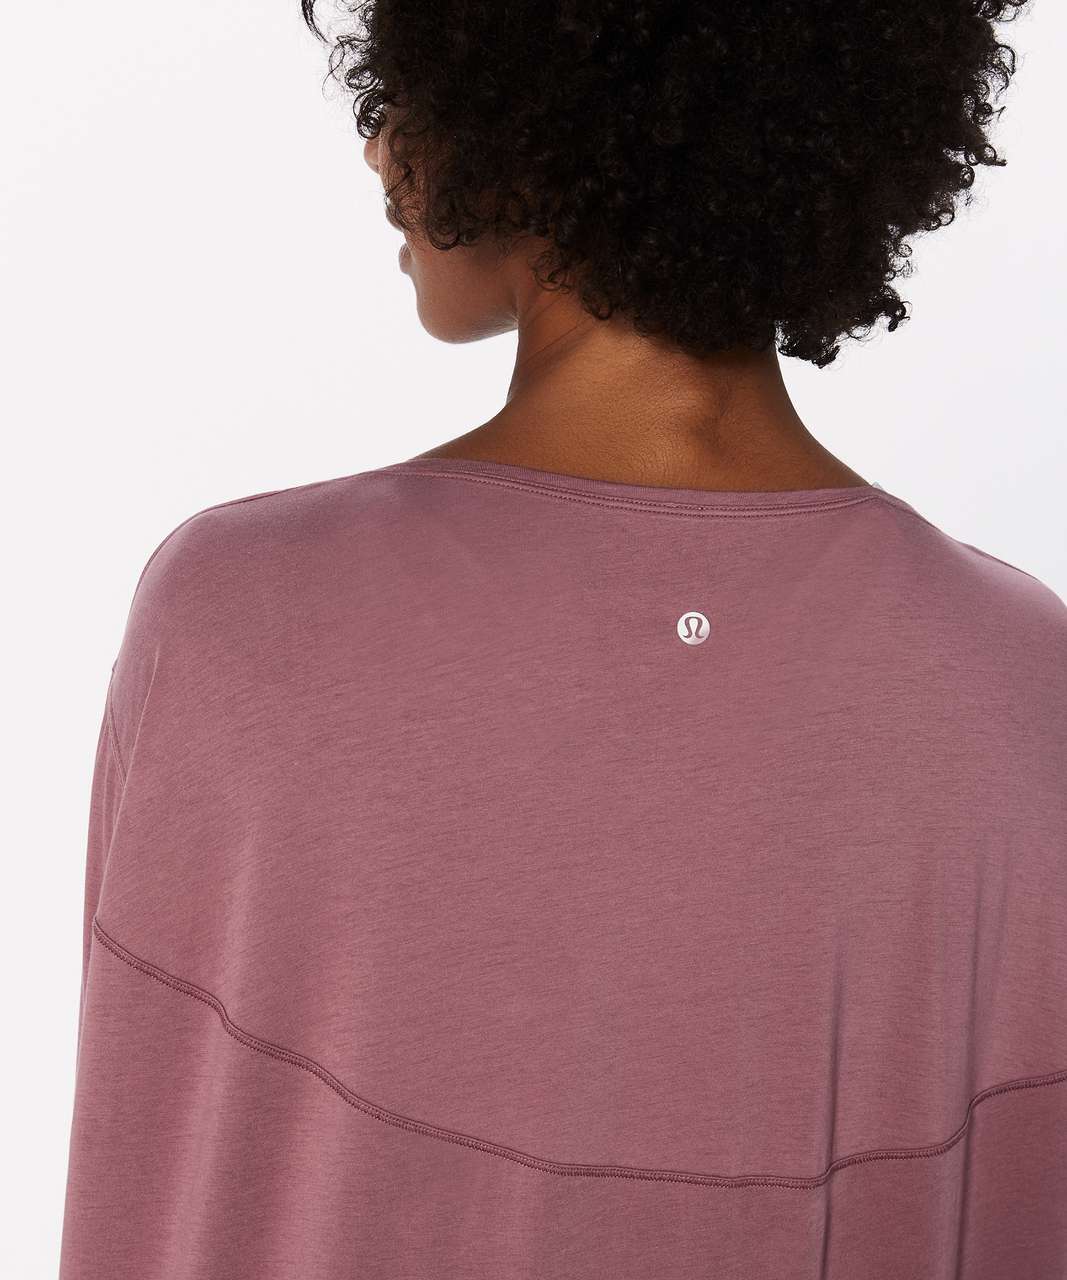 Lululemon Back In Action Long Sleeve - Figue